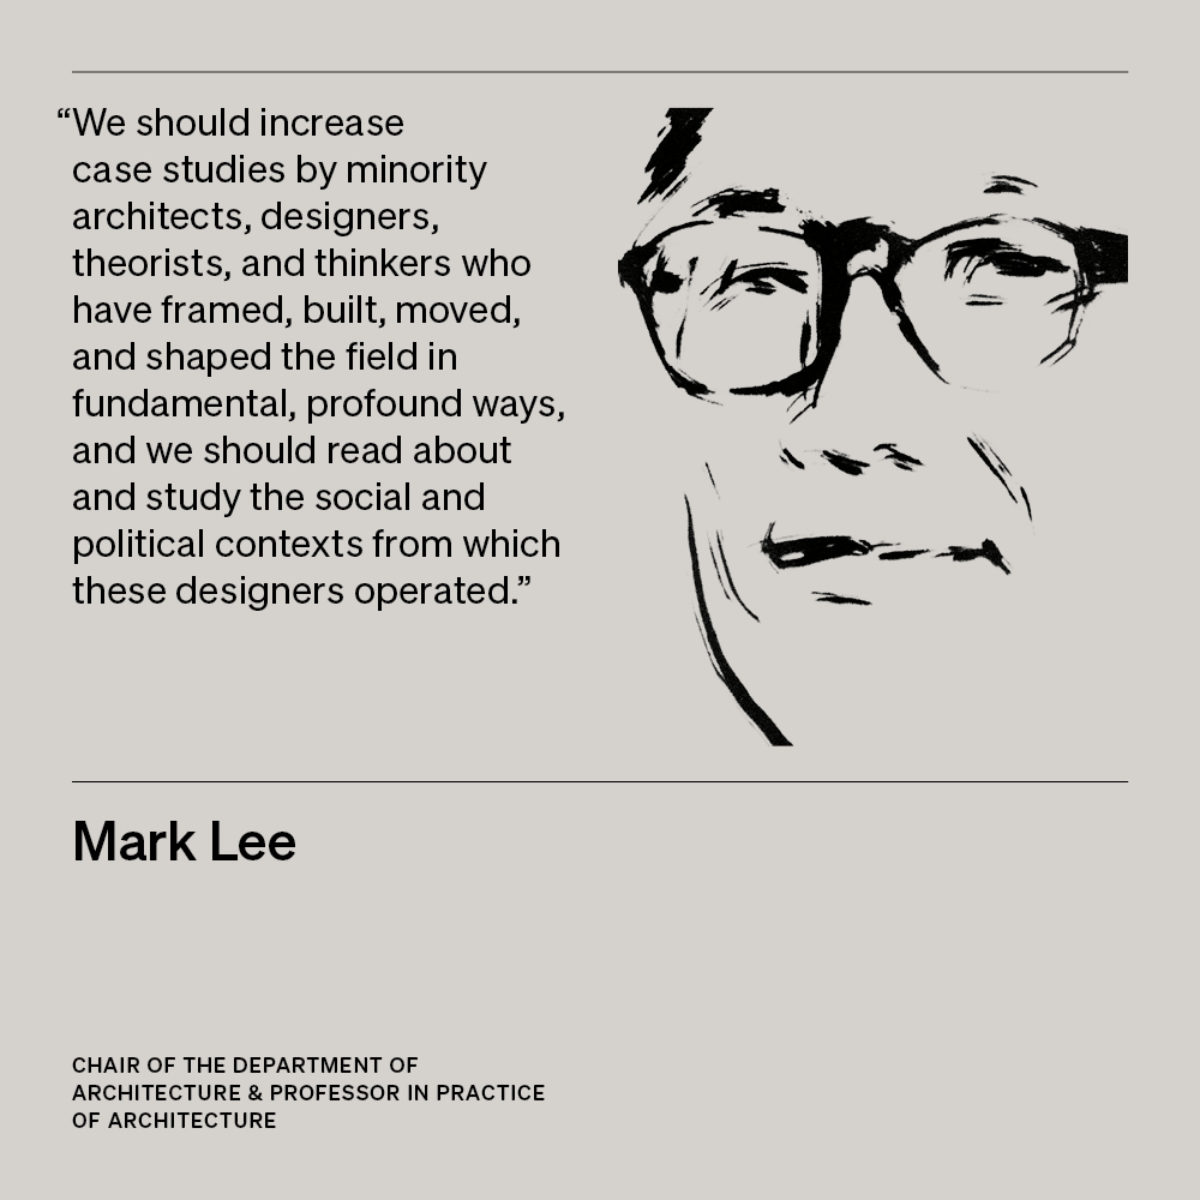 Illustration of Mark Lee, Chair of the Department of Architecture & Professor in Practice of Architecture, with text 